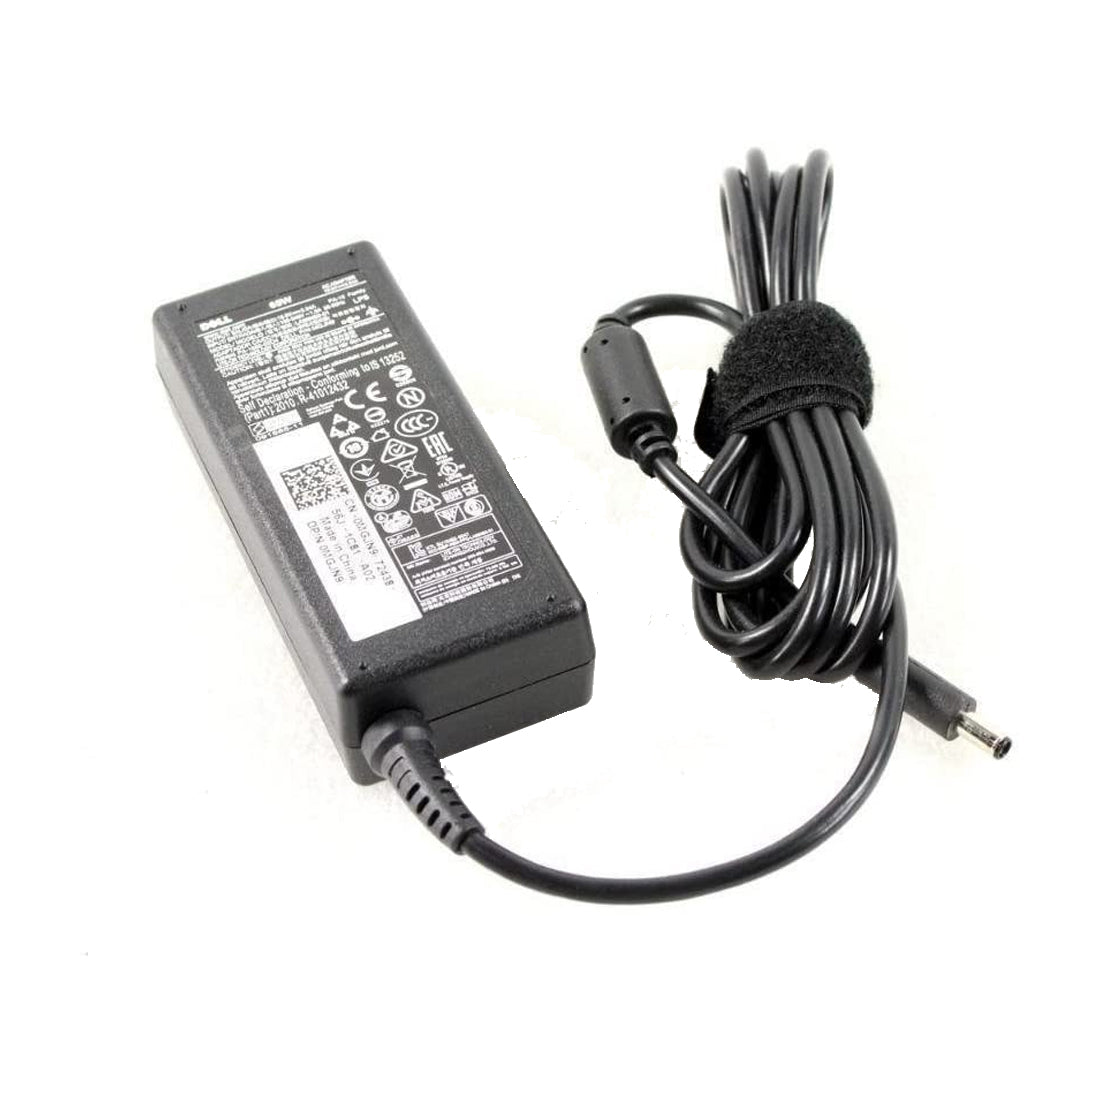 Dell Original 65W 19.5V 4.5mm Pin Laptop Charger Adapter for Inspiron 13 5370 With Power Cord